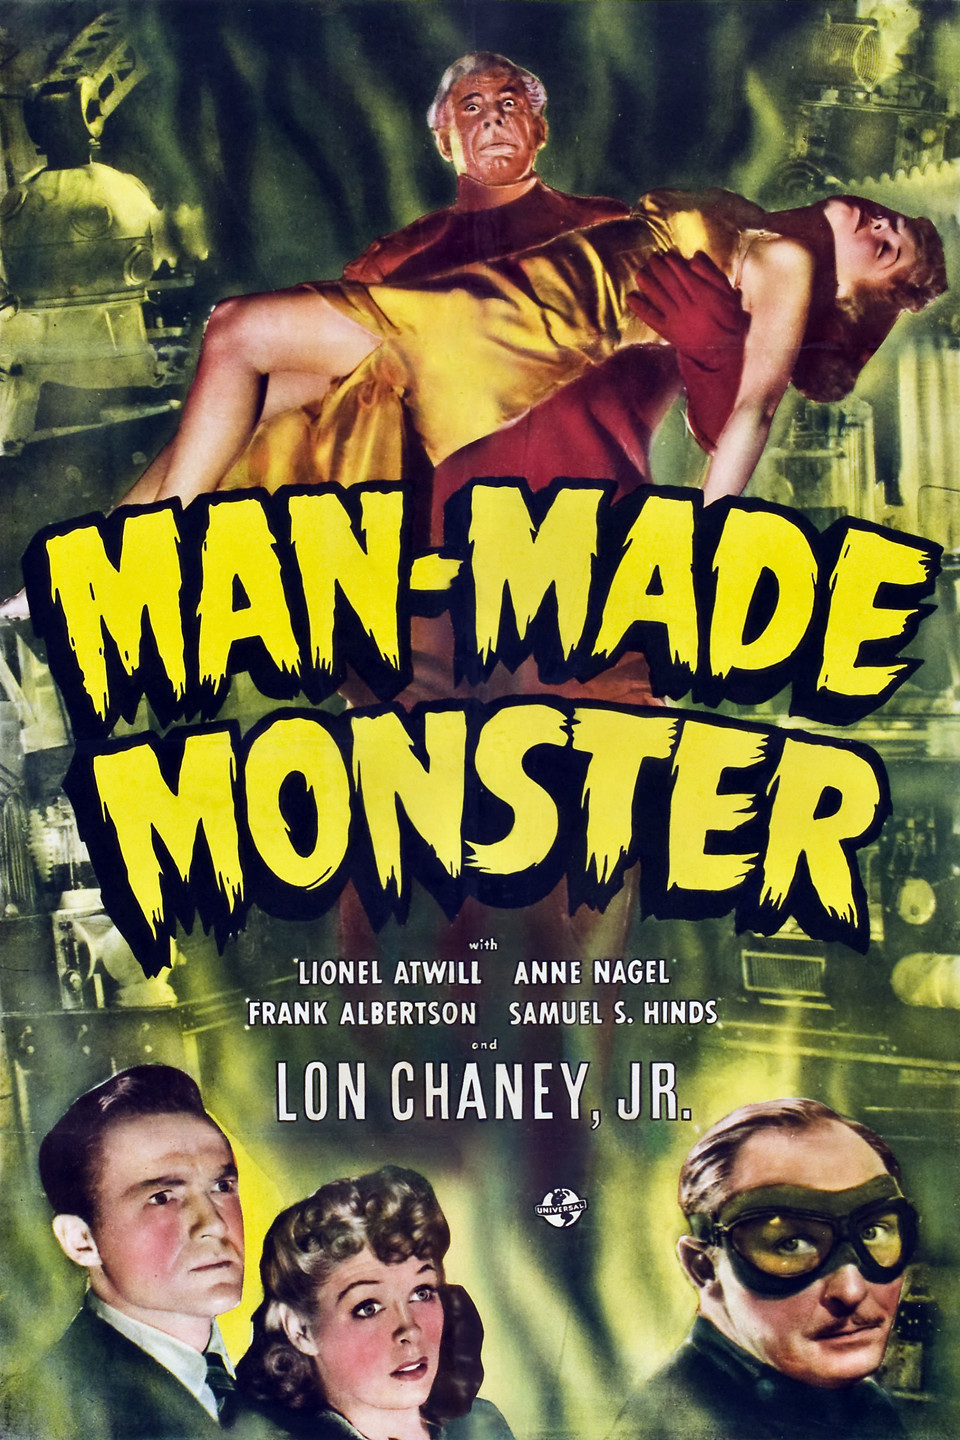 ManMade Monster Pictures Rotten Tomatoes